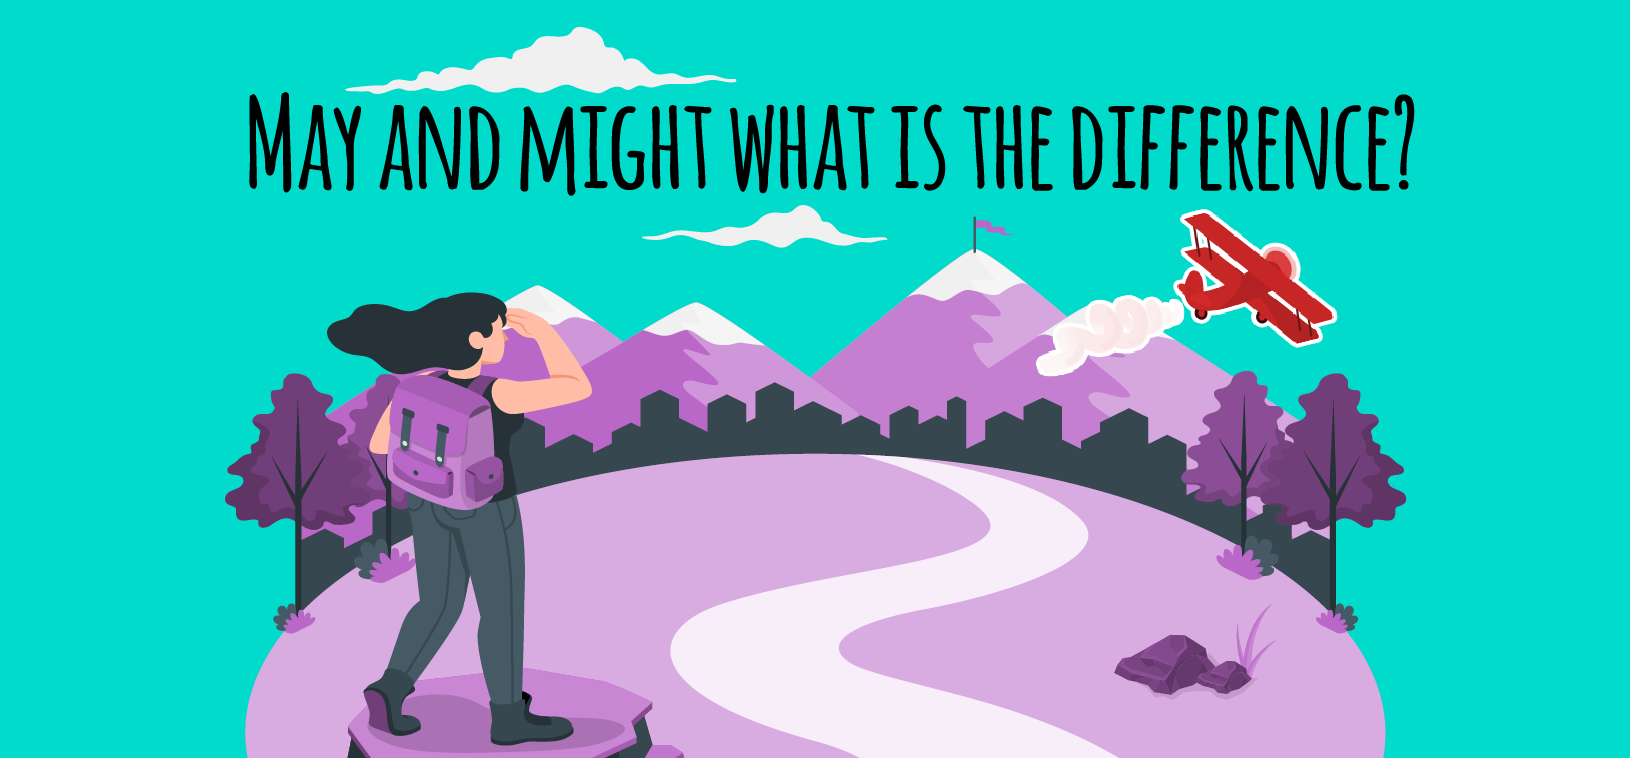 May or Might: What's the Difference? (With Examples)